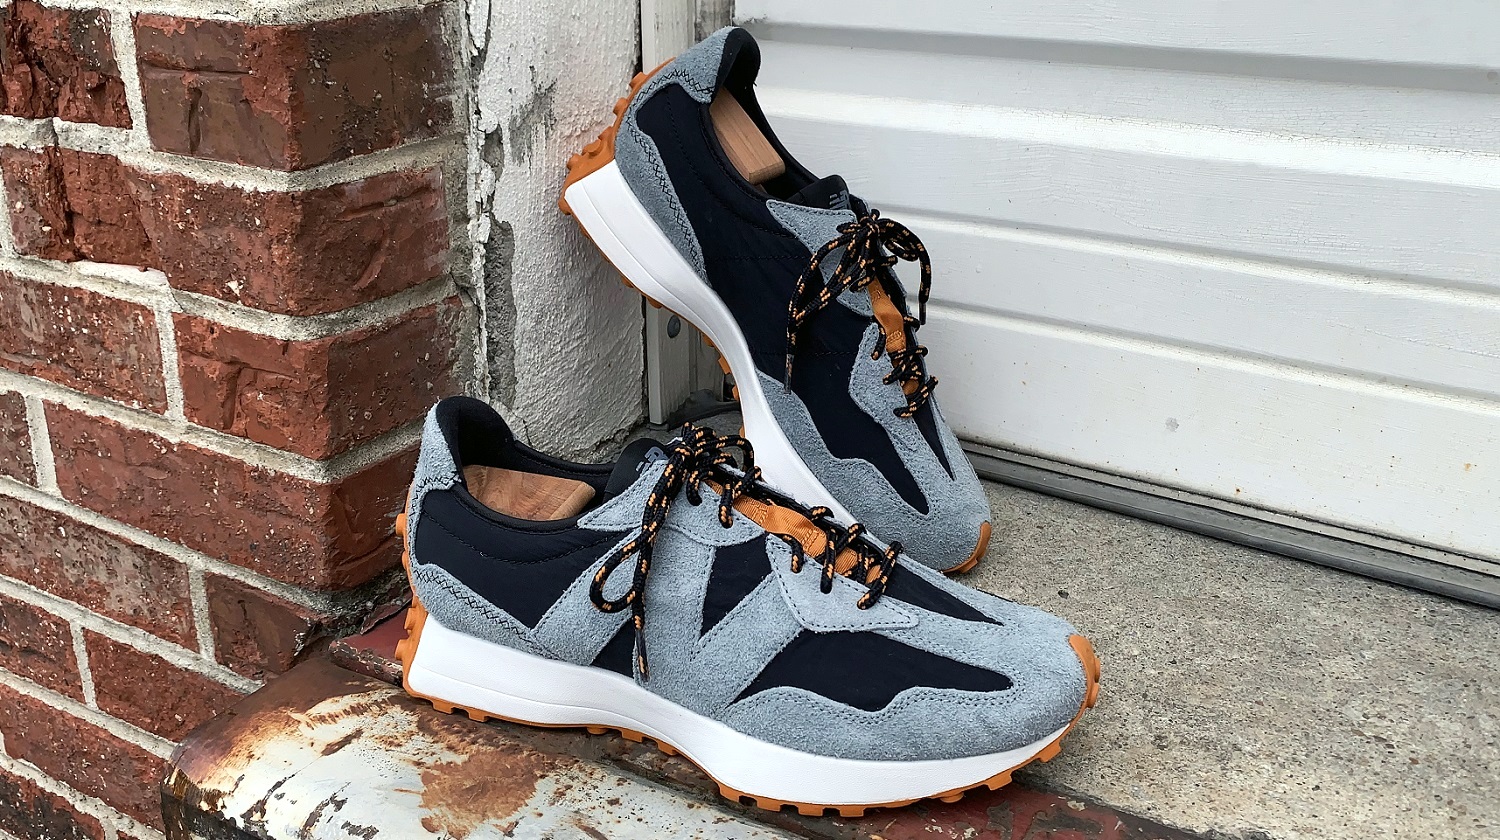 In Review: J. Crew New Balance 327 Retro Trainers